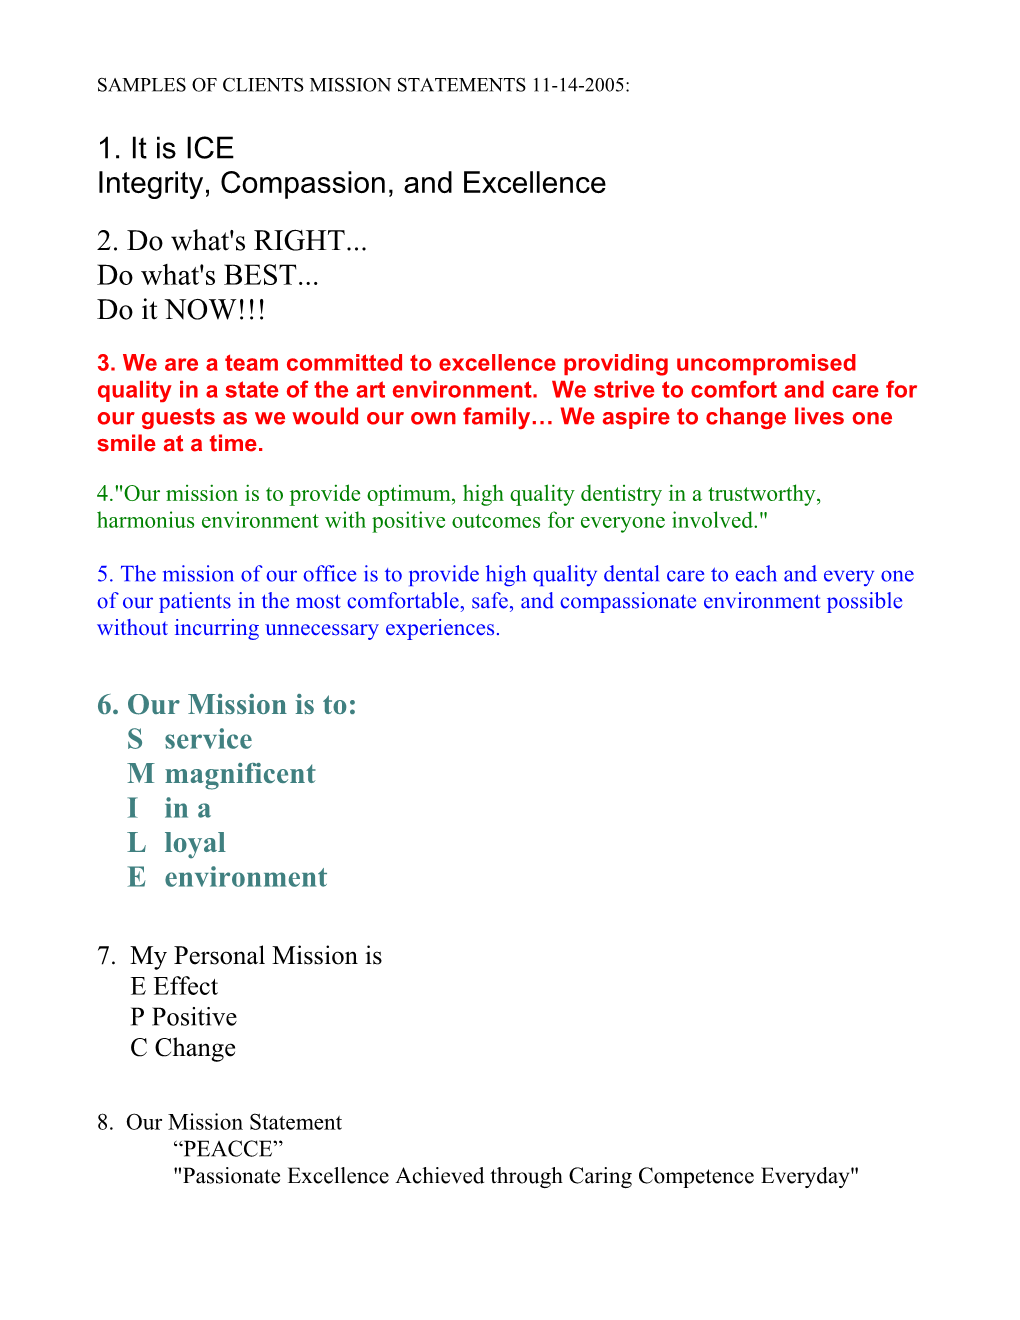 Samples of Mission Statements 11-14-2005